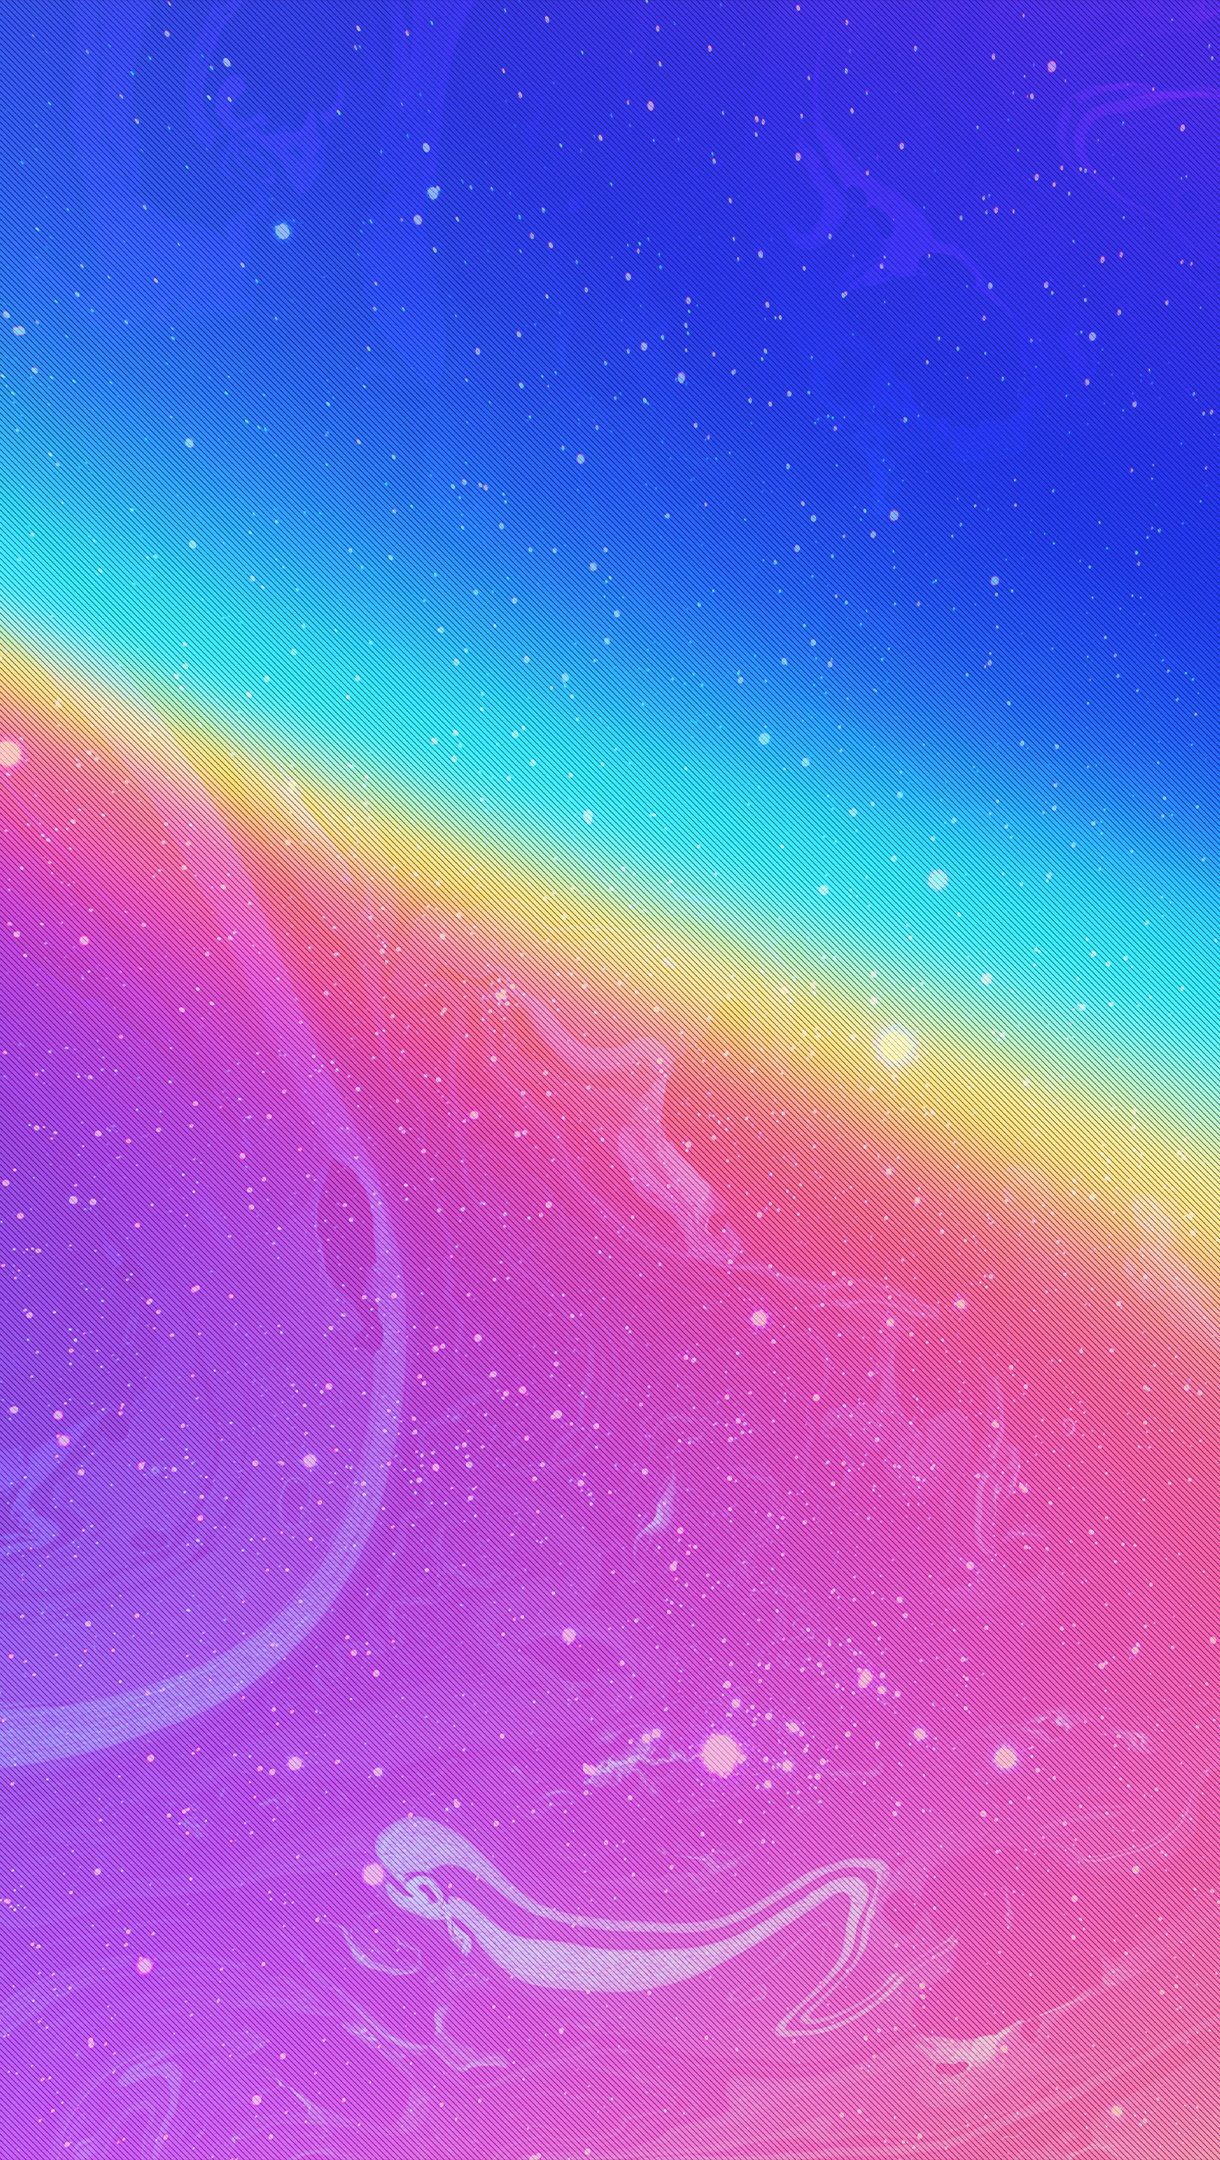 Colors in the rainbow Wallpaper 4k HD ID:6186